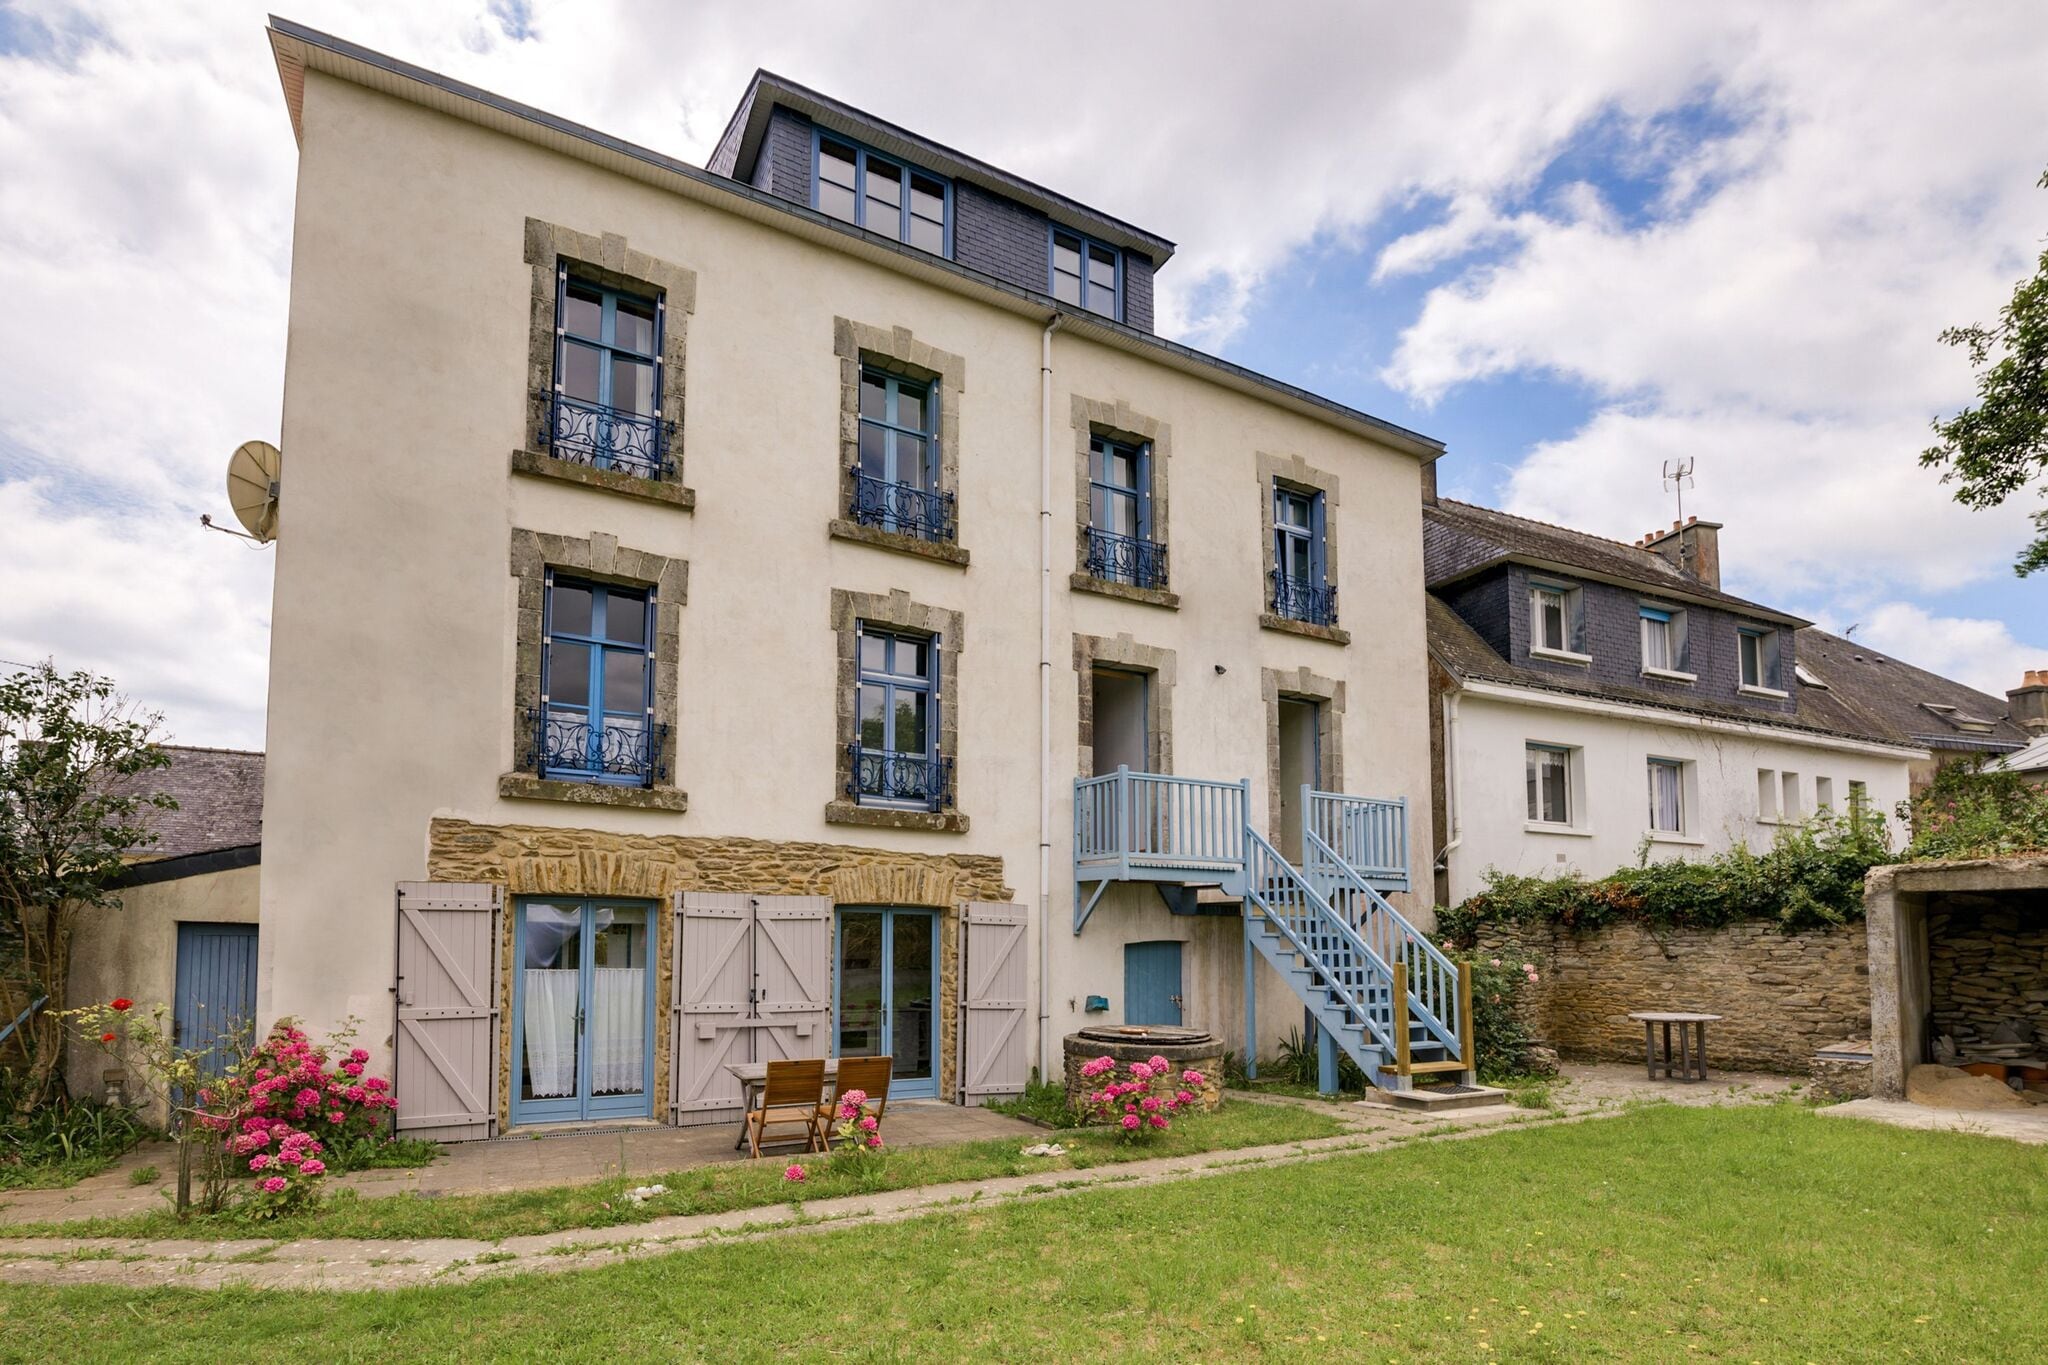 Apartment about 100 metres from the Atlantic Ocean to the south of Brittany.